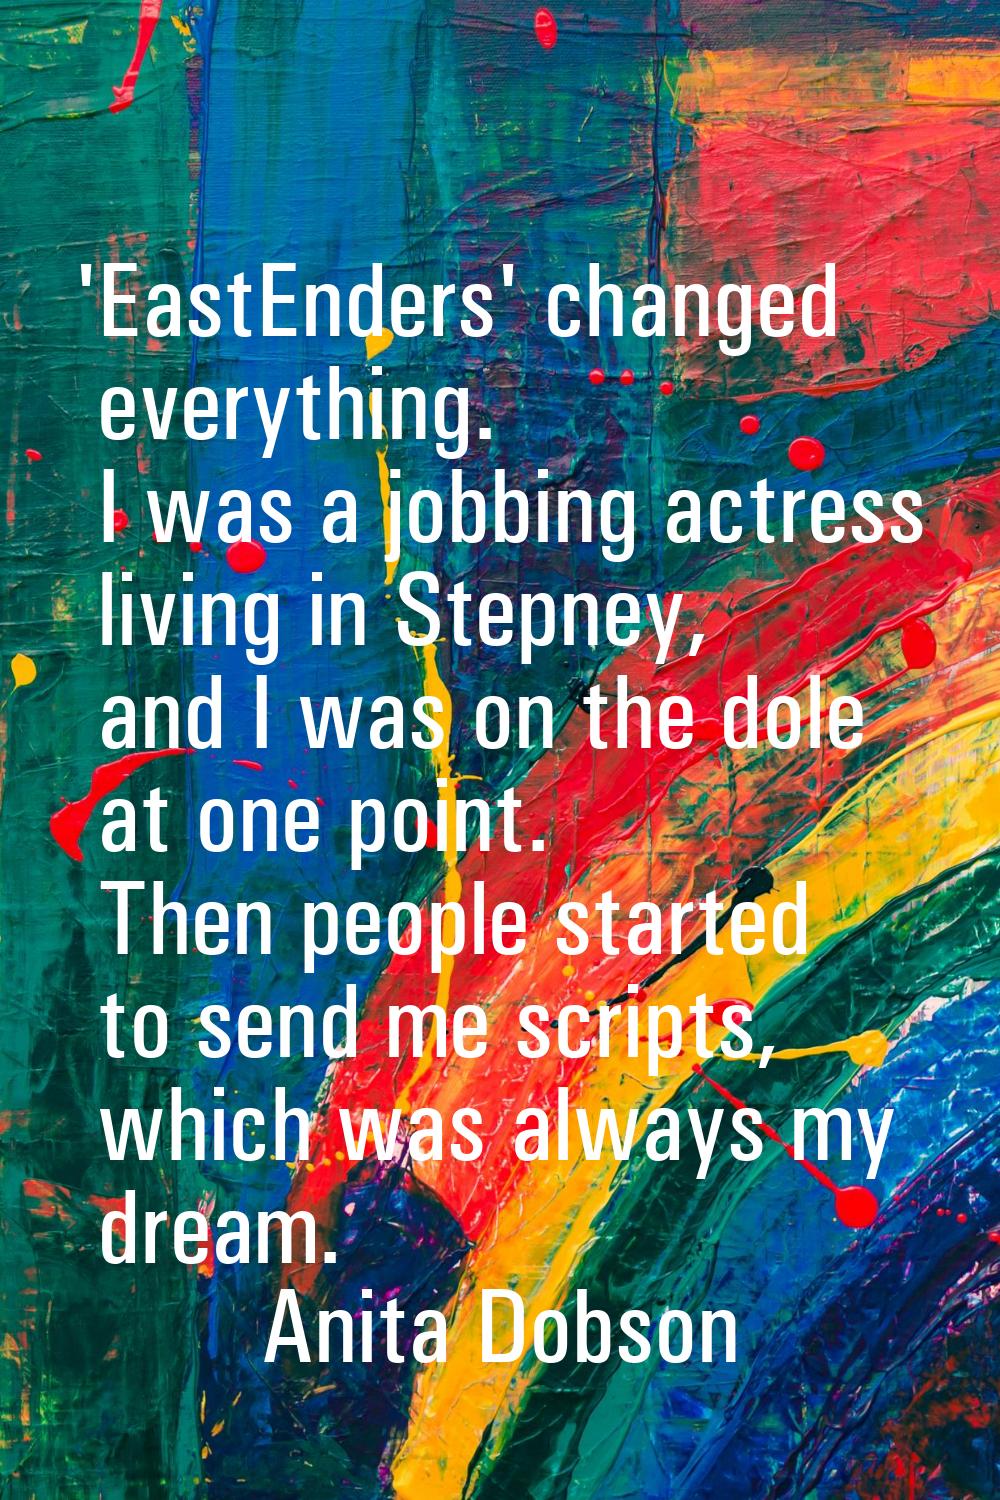 'EastEnders' changed everything. I was a jobbing actress living in Stepney, and I was on the dole a